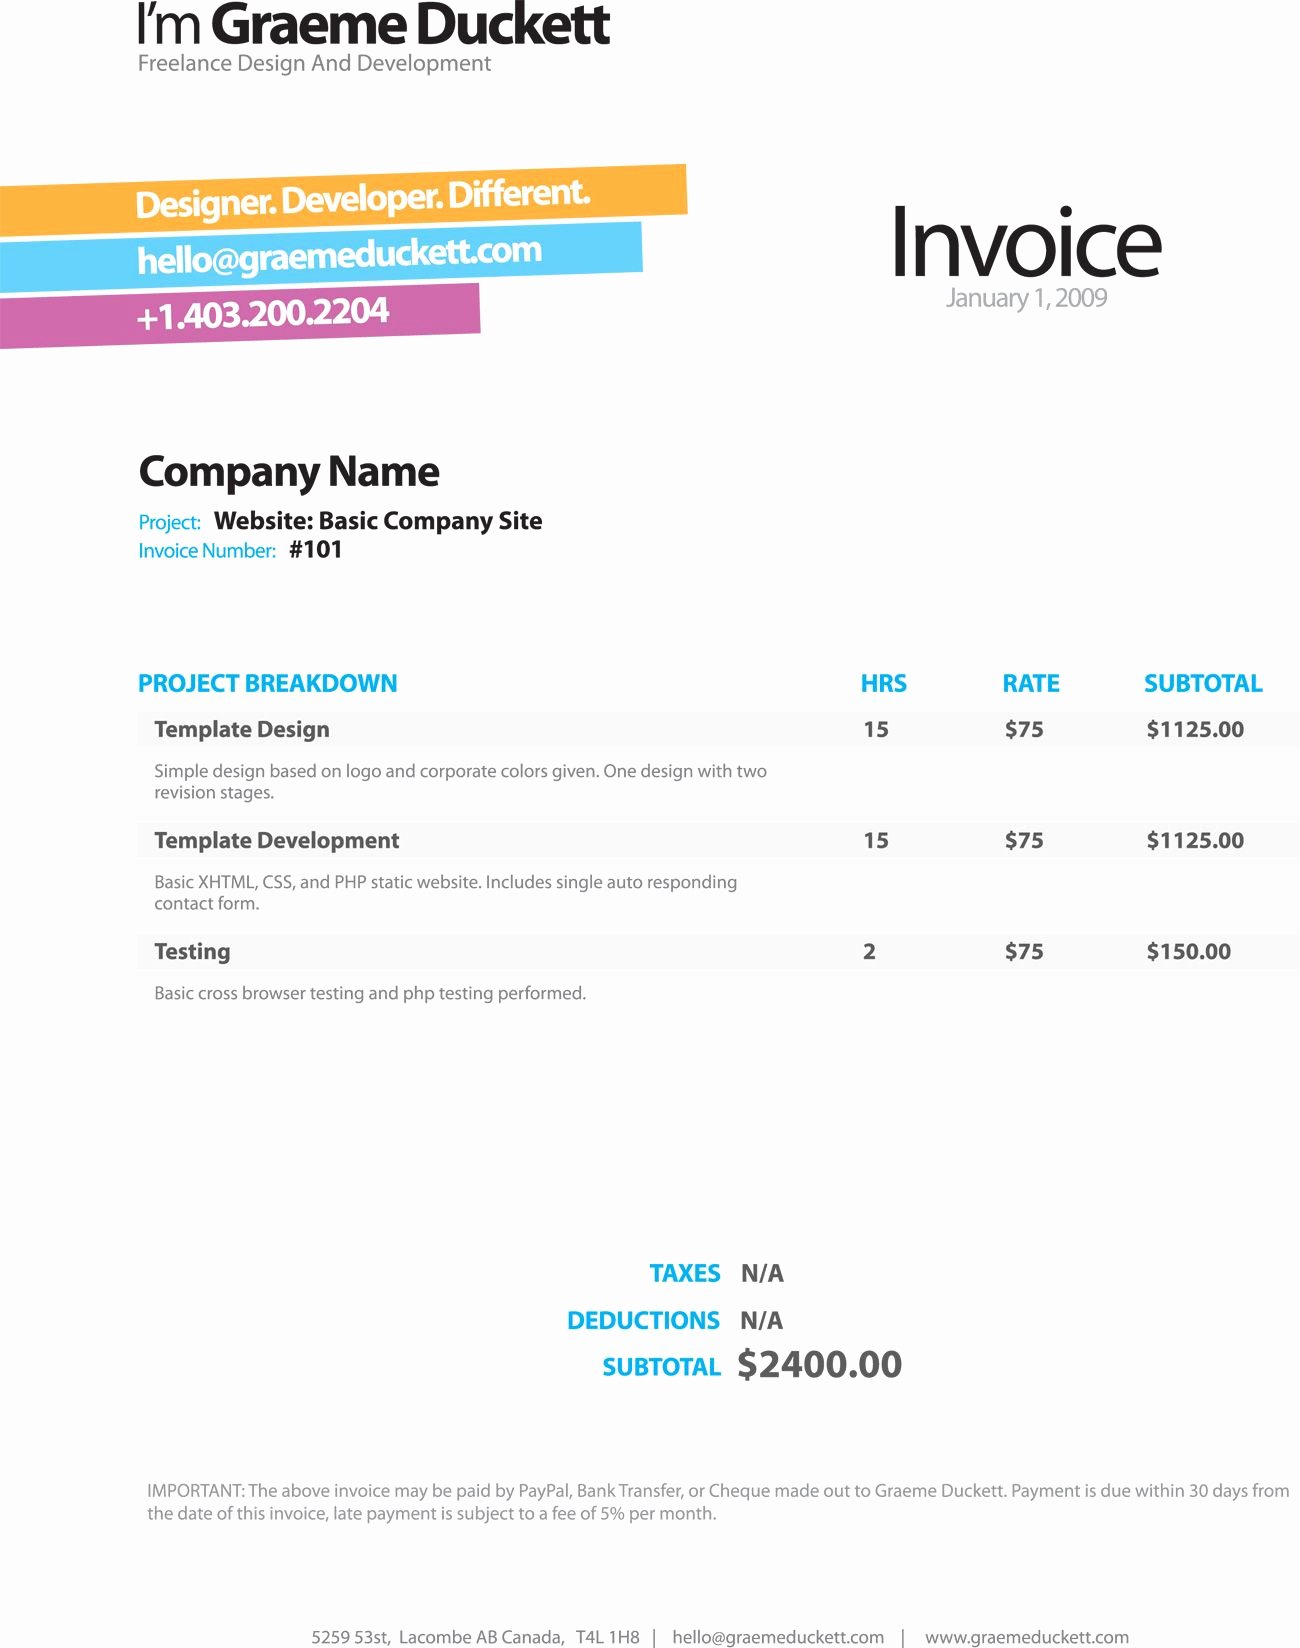 Web Design Invoice Template Beautiful Invoice Like A Pro Design Examples and Best Practices